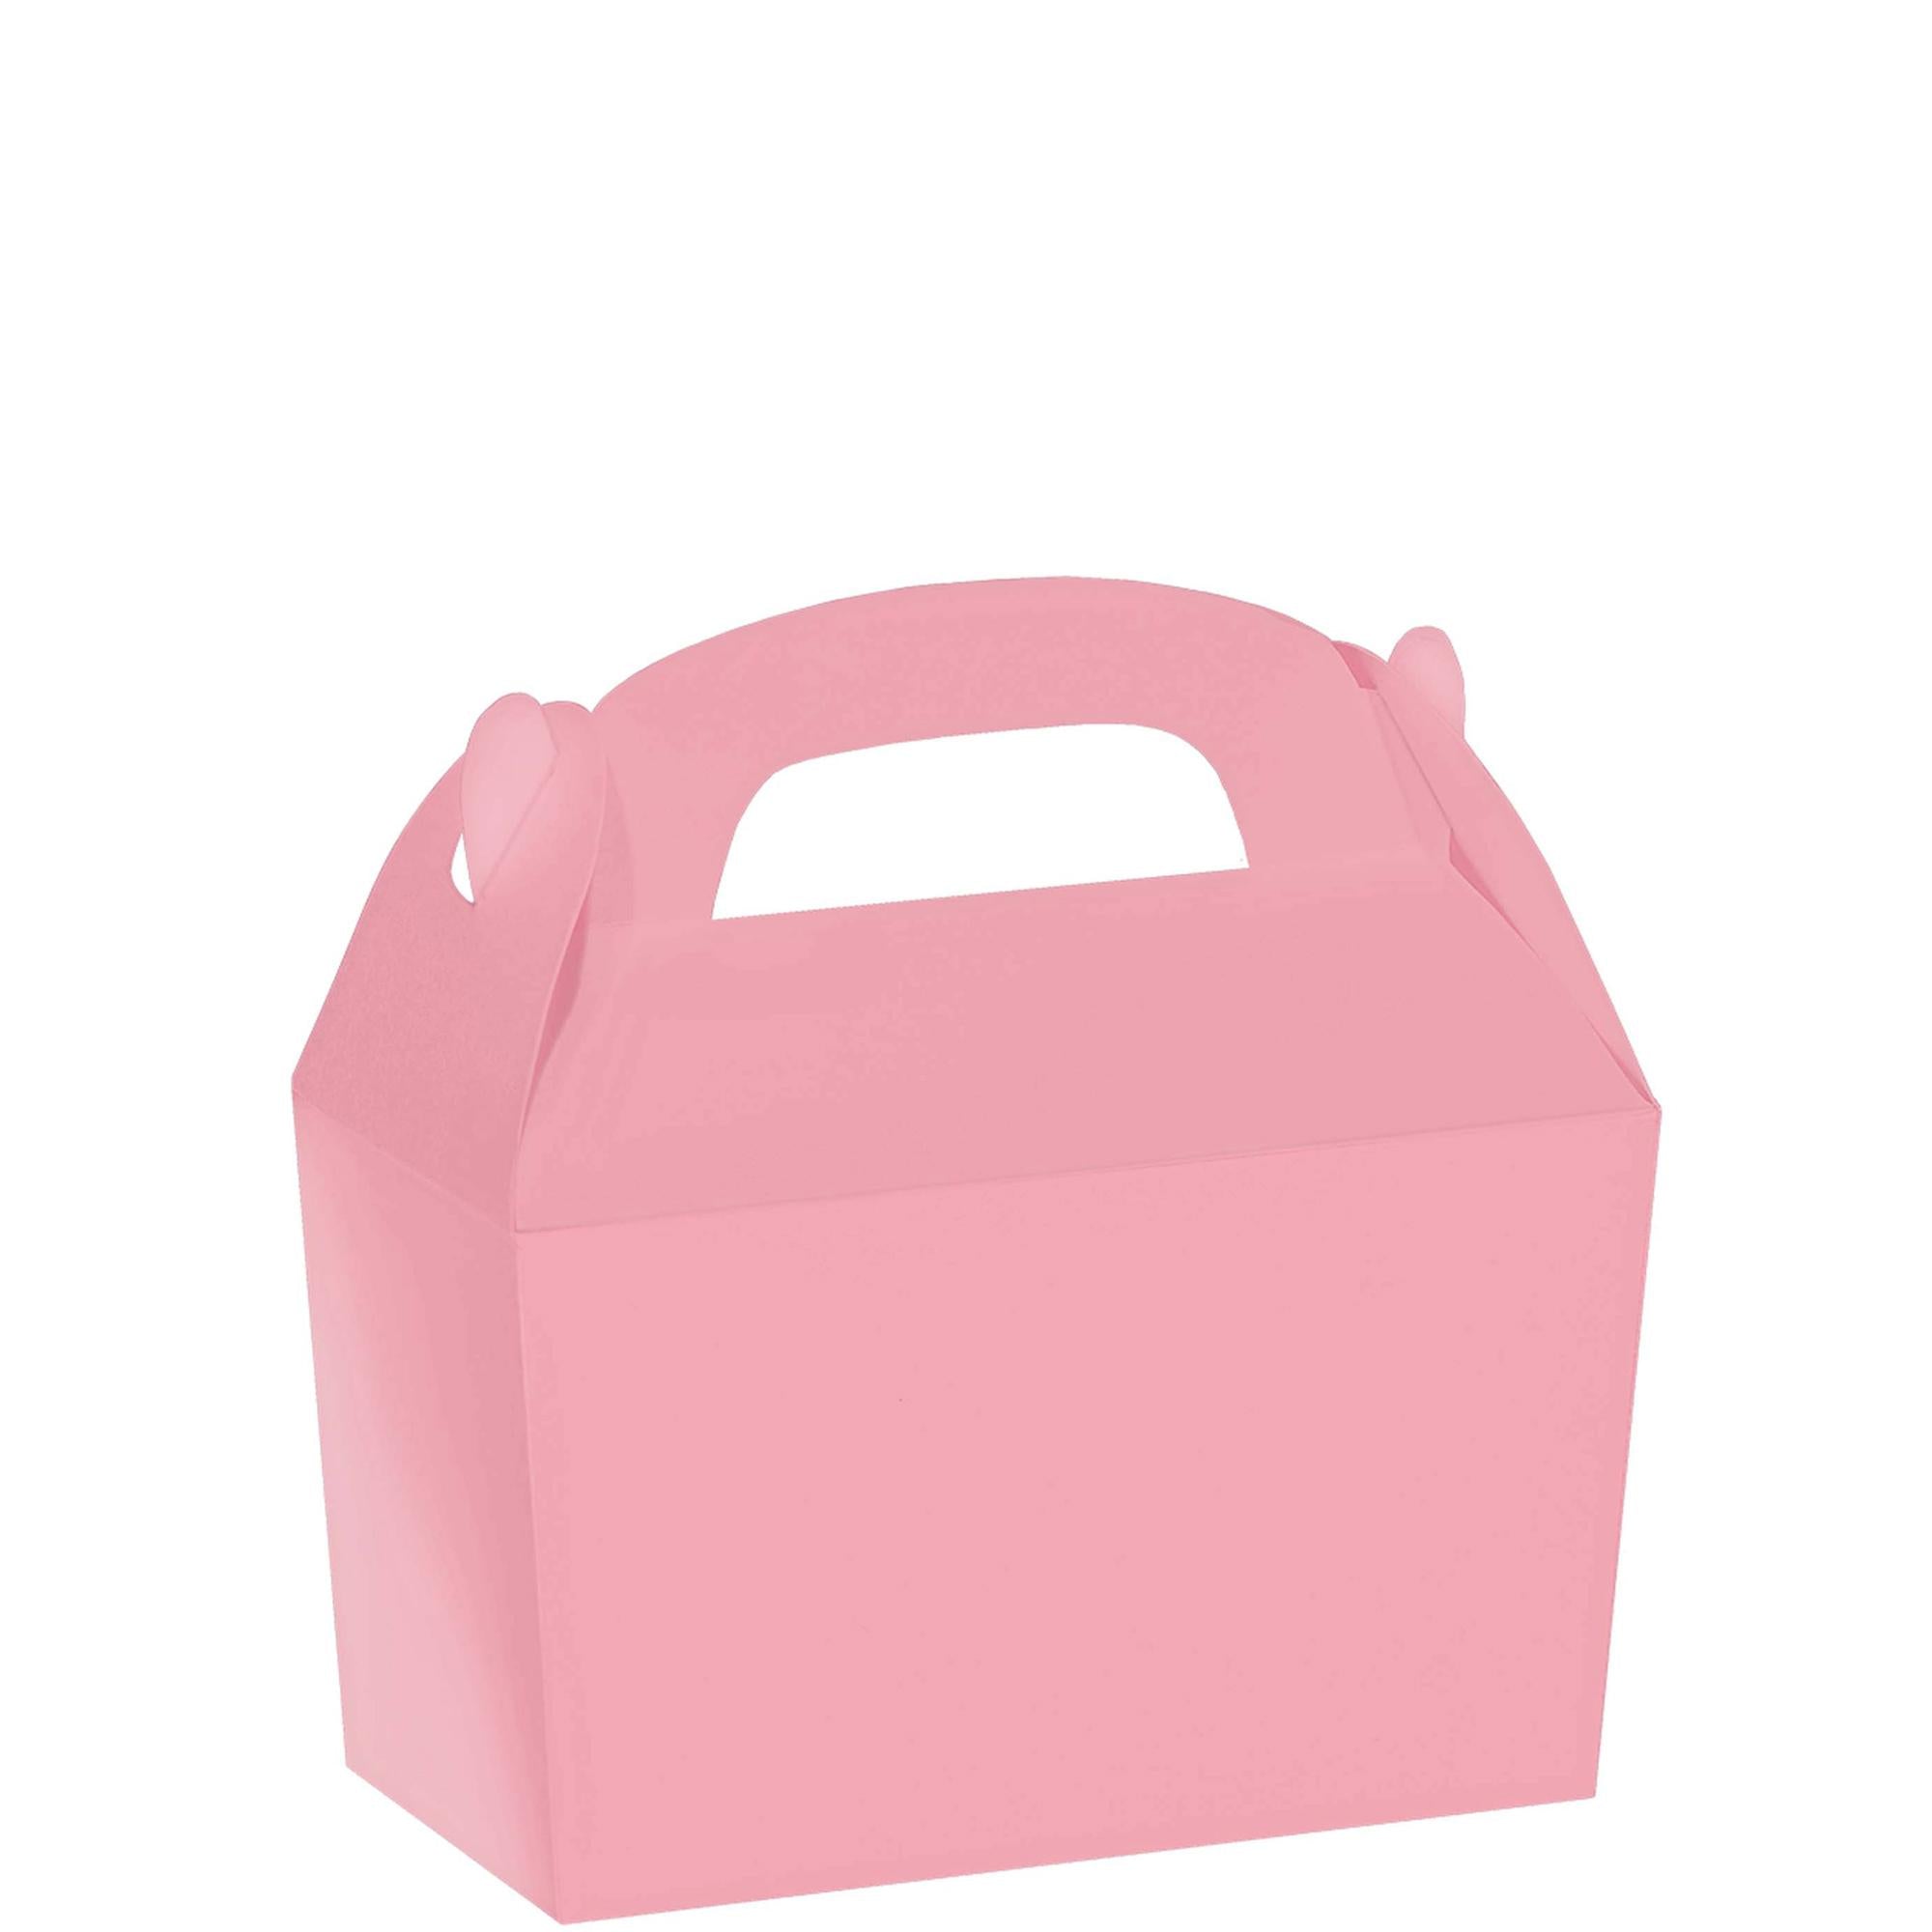 New Pink Gable Box Favours - Party Centre